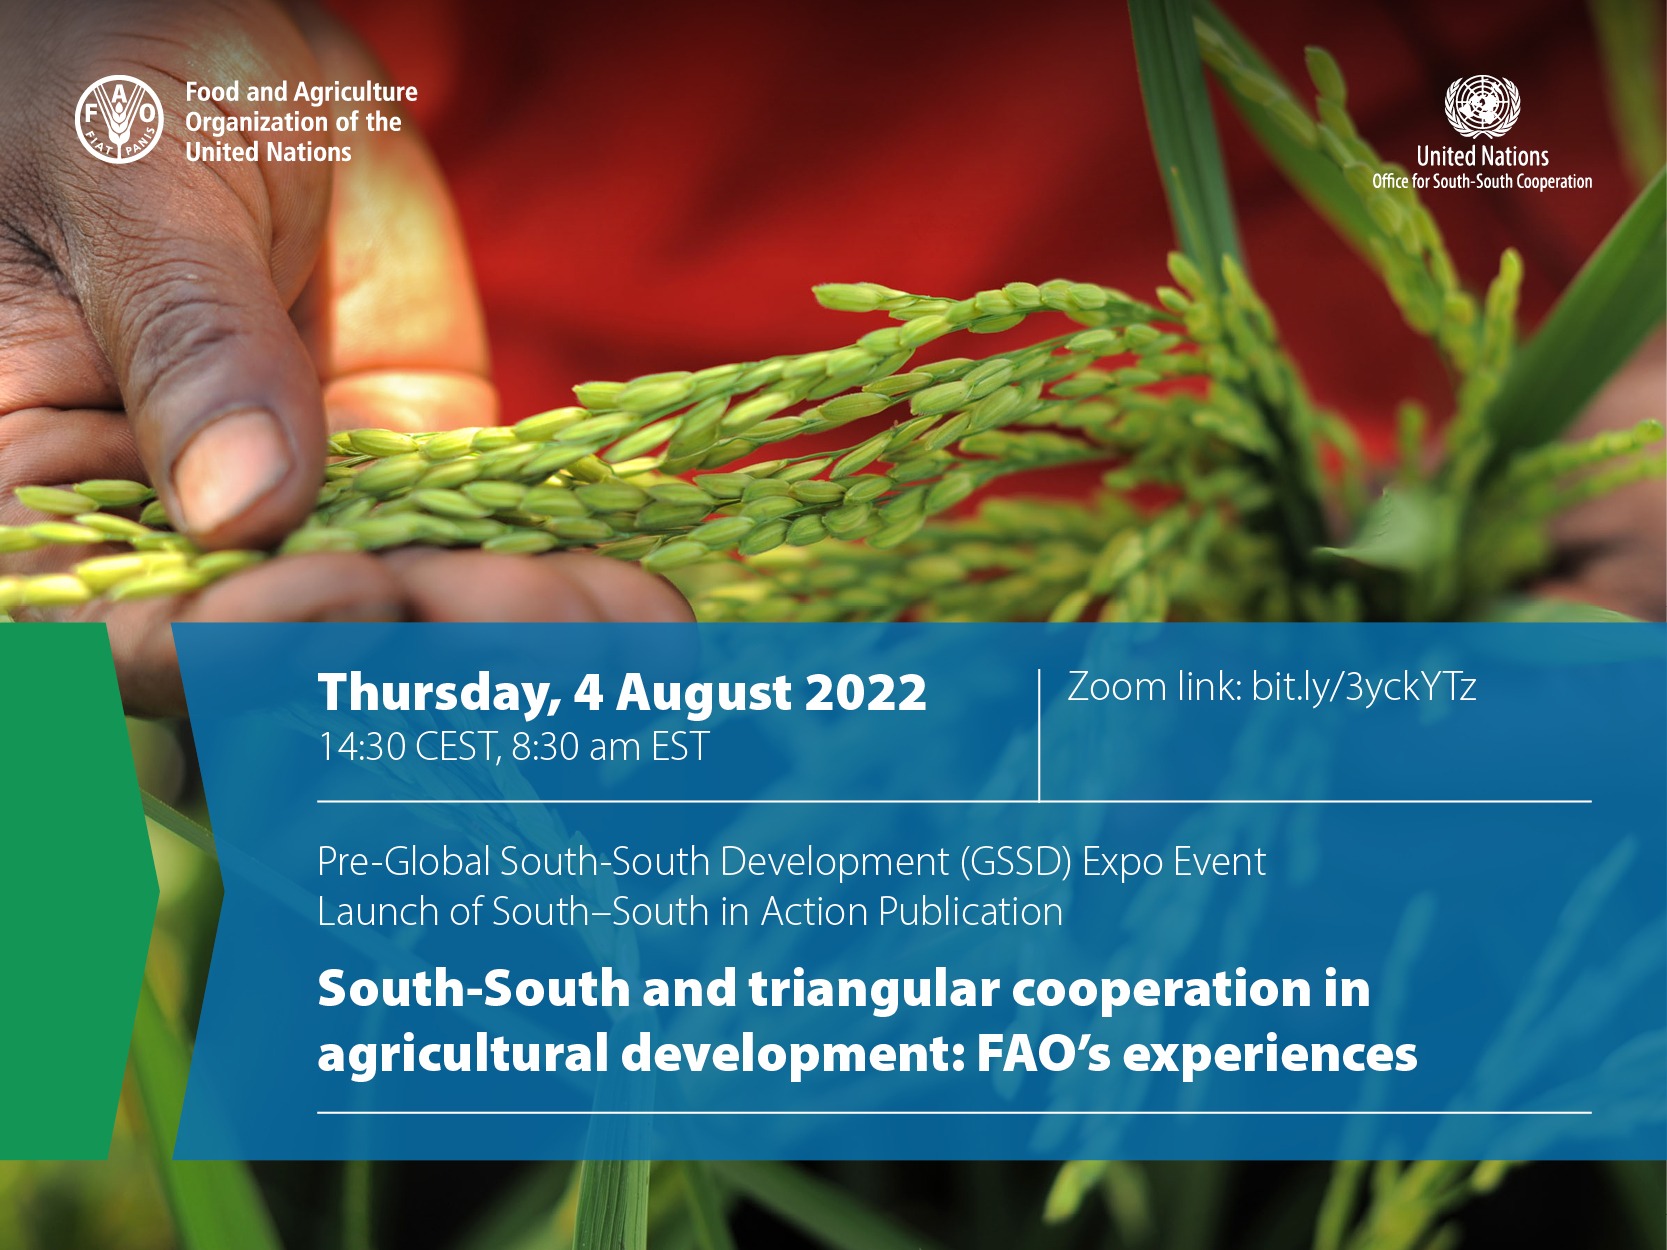 FAO and UNOSSC Launch New South-South in Action Publication